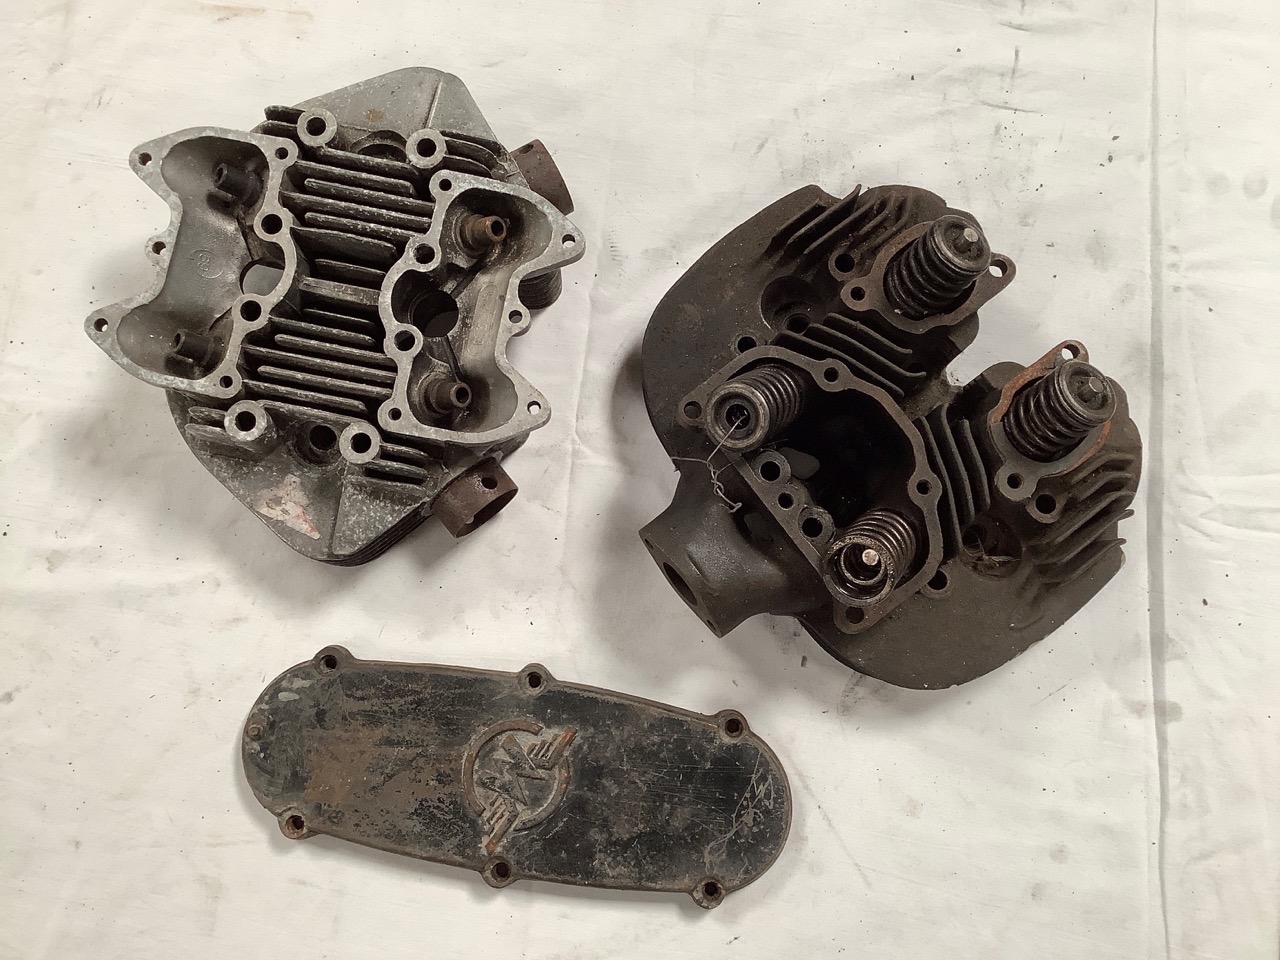 Two cylinder heads and a Matchless timing cover.